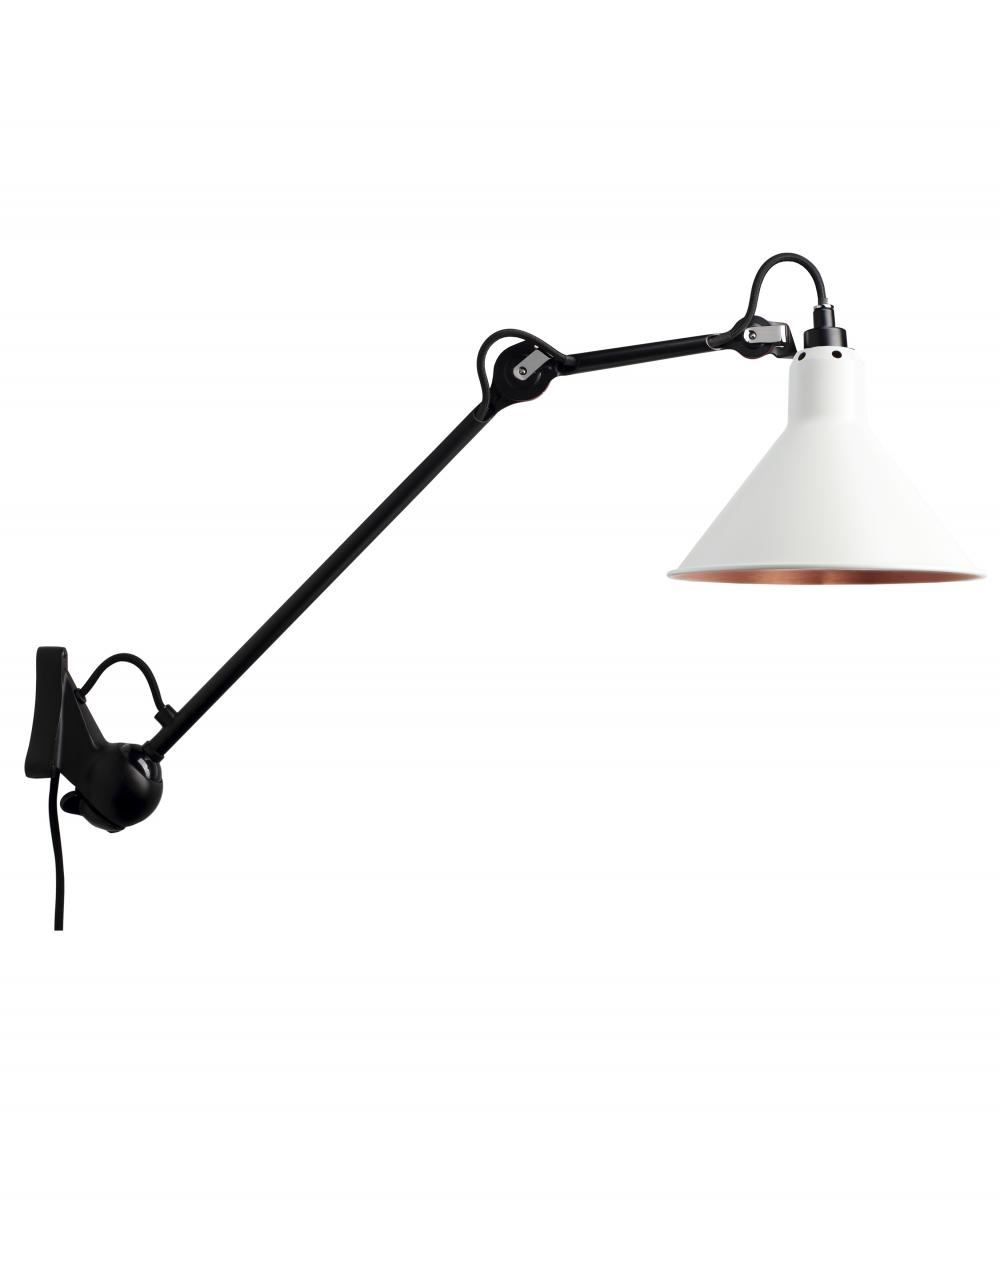 Lampe Gras 222 Wall Light Black Arm White Shade With Copper Interior Conic Shade